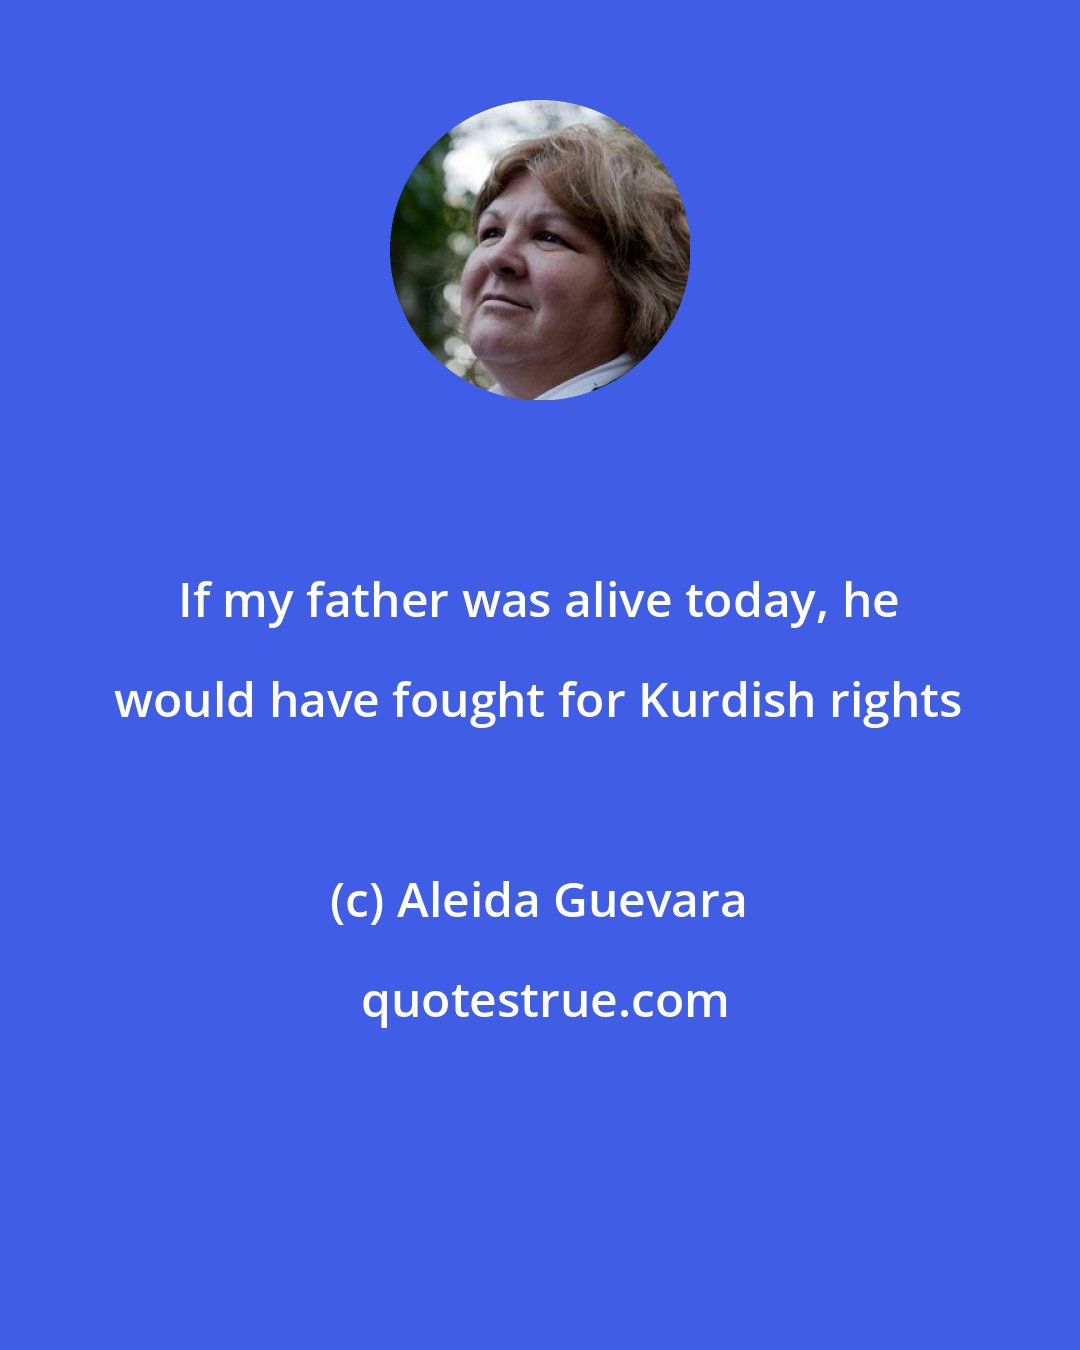 Aleida Guevara: If my father was alive today, he would have fought for Kurdish rights